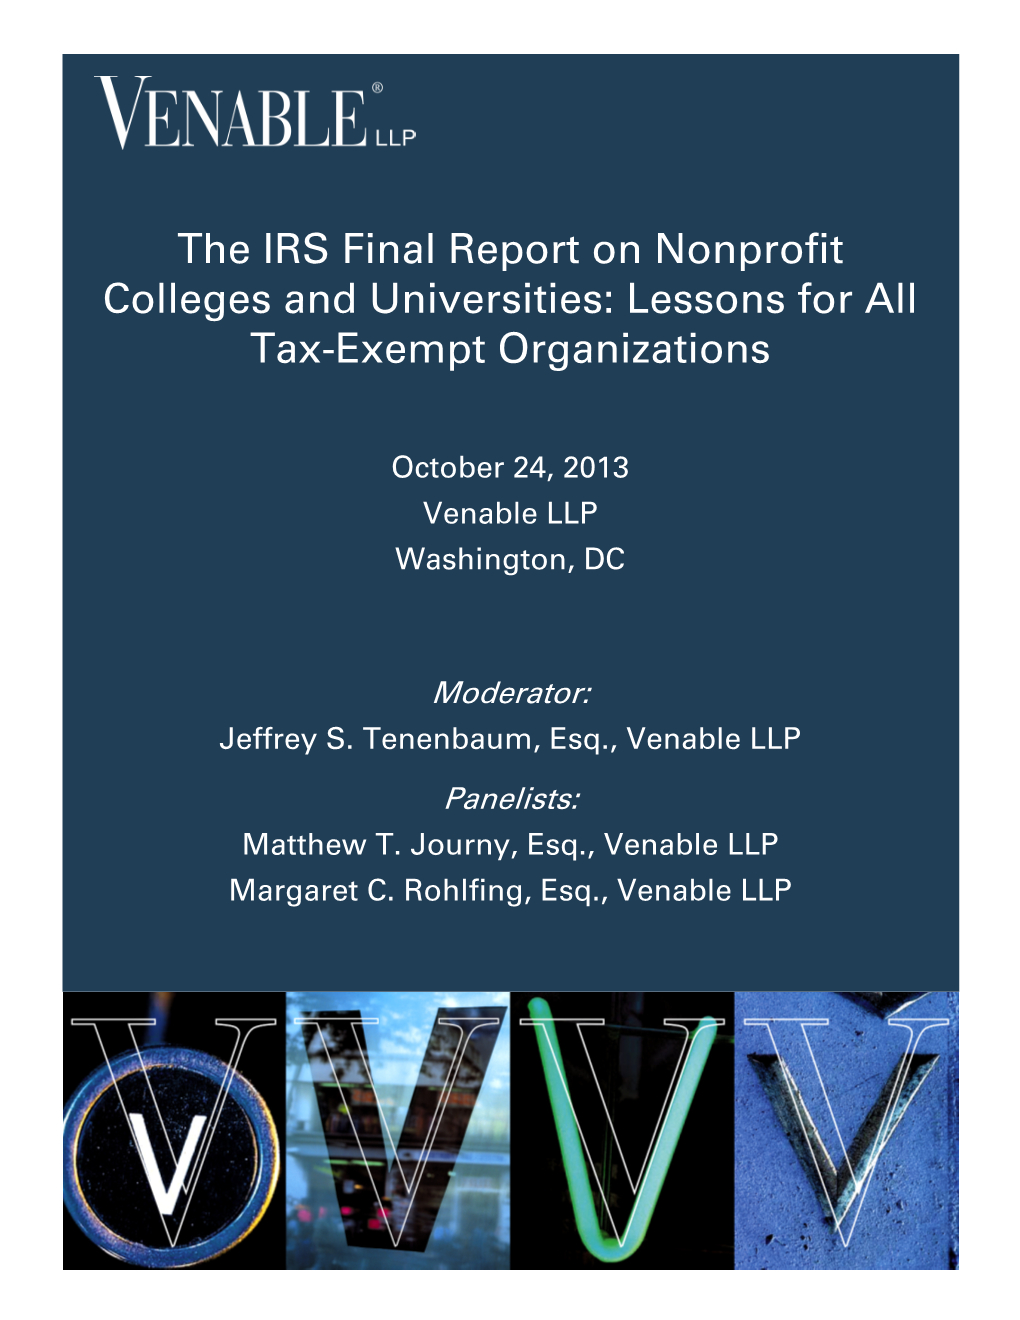 The IRS Final Report on Nonprofit Colleges and Universities: Lessons for All Tax-Exempt Organizations